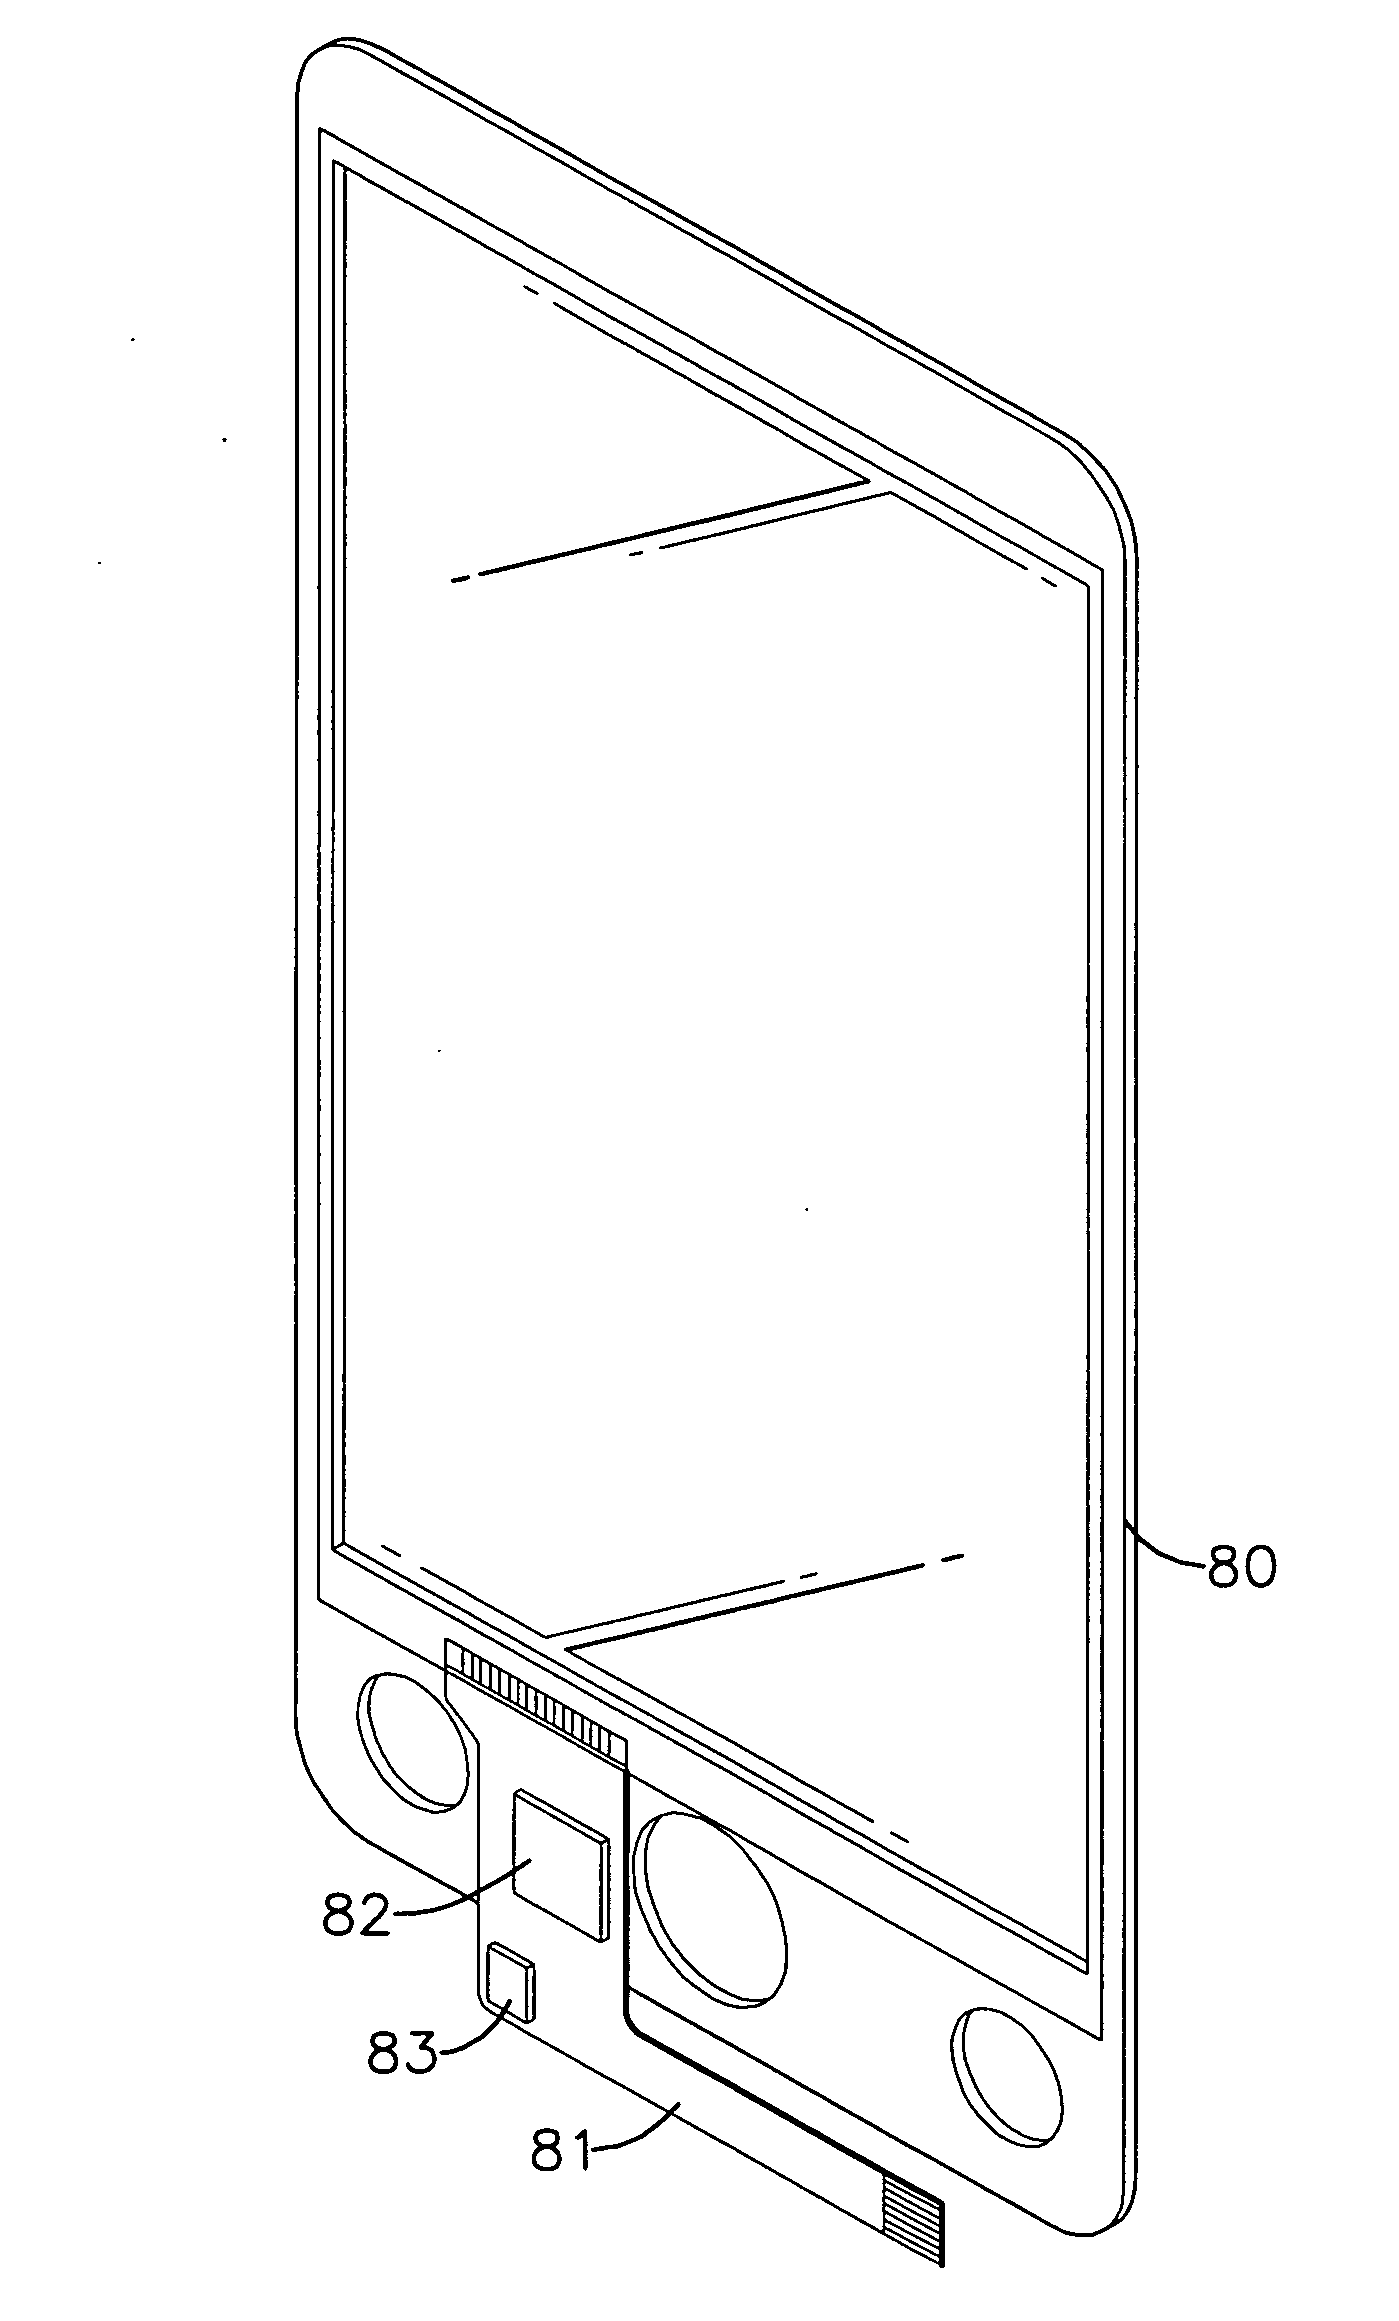 Projected capacitive panel